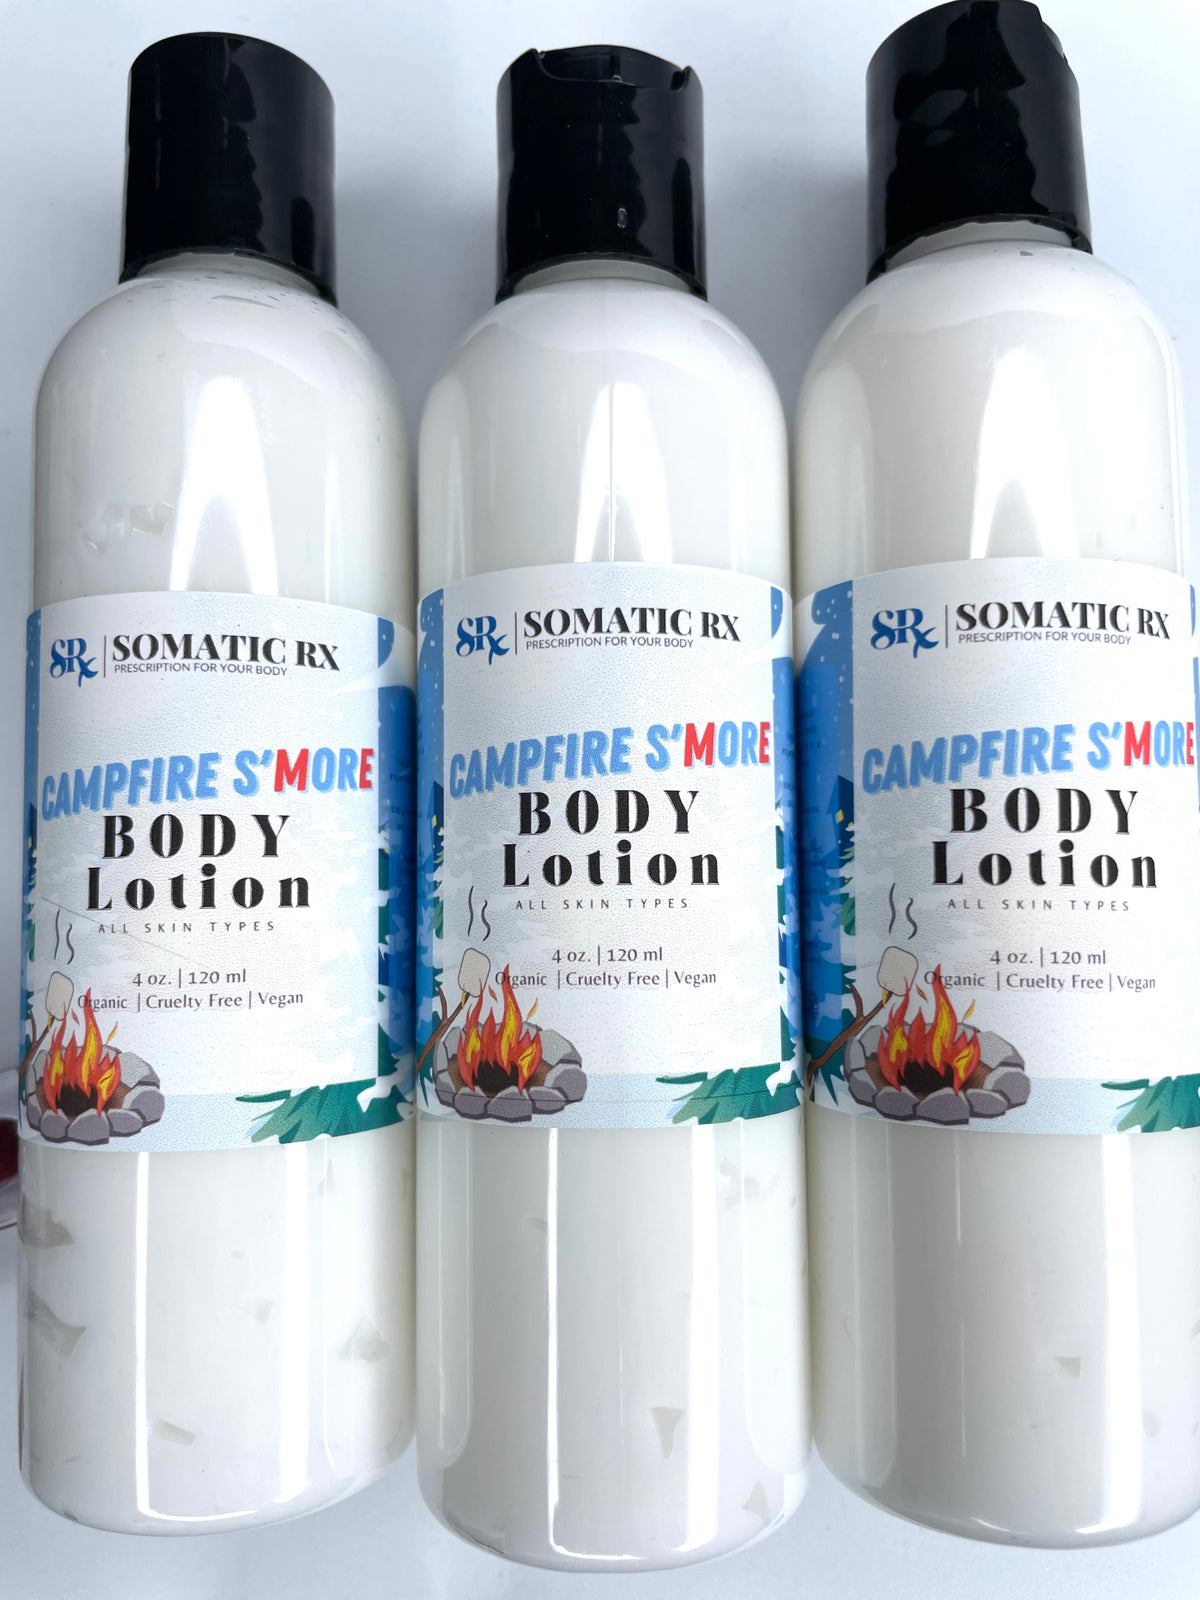 Campfire S'more Body Lotion